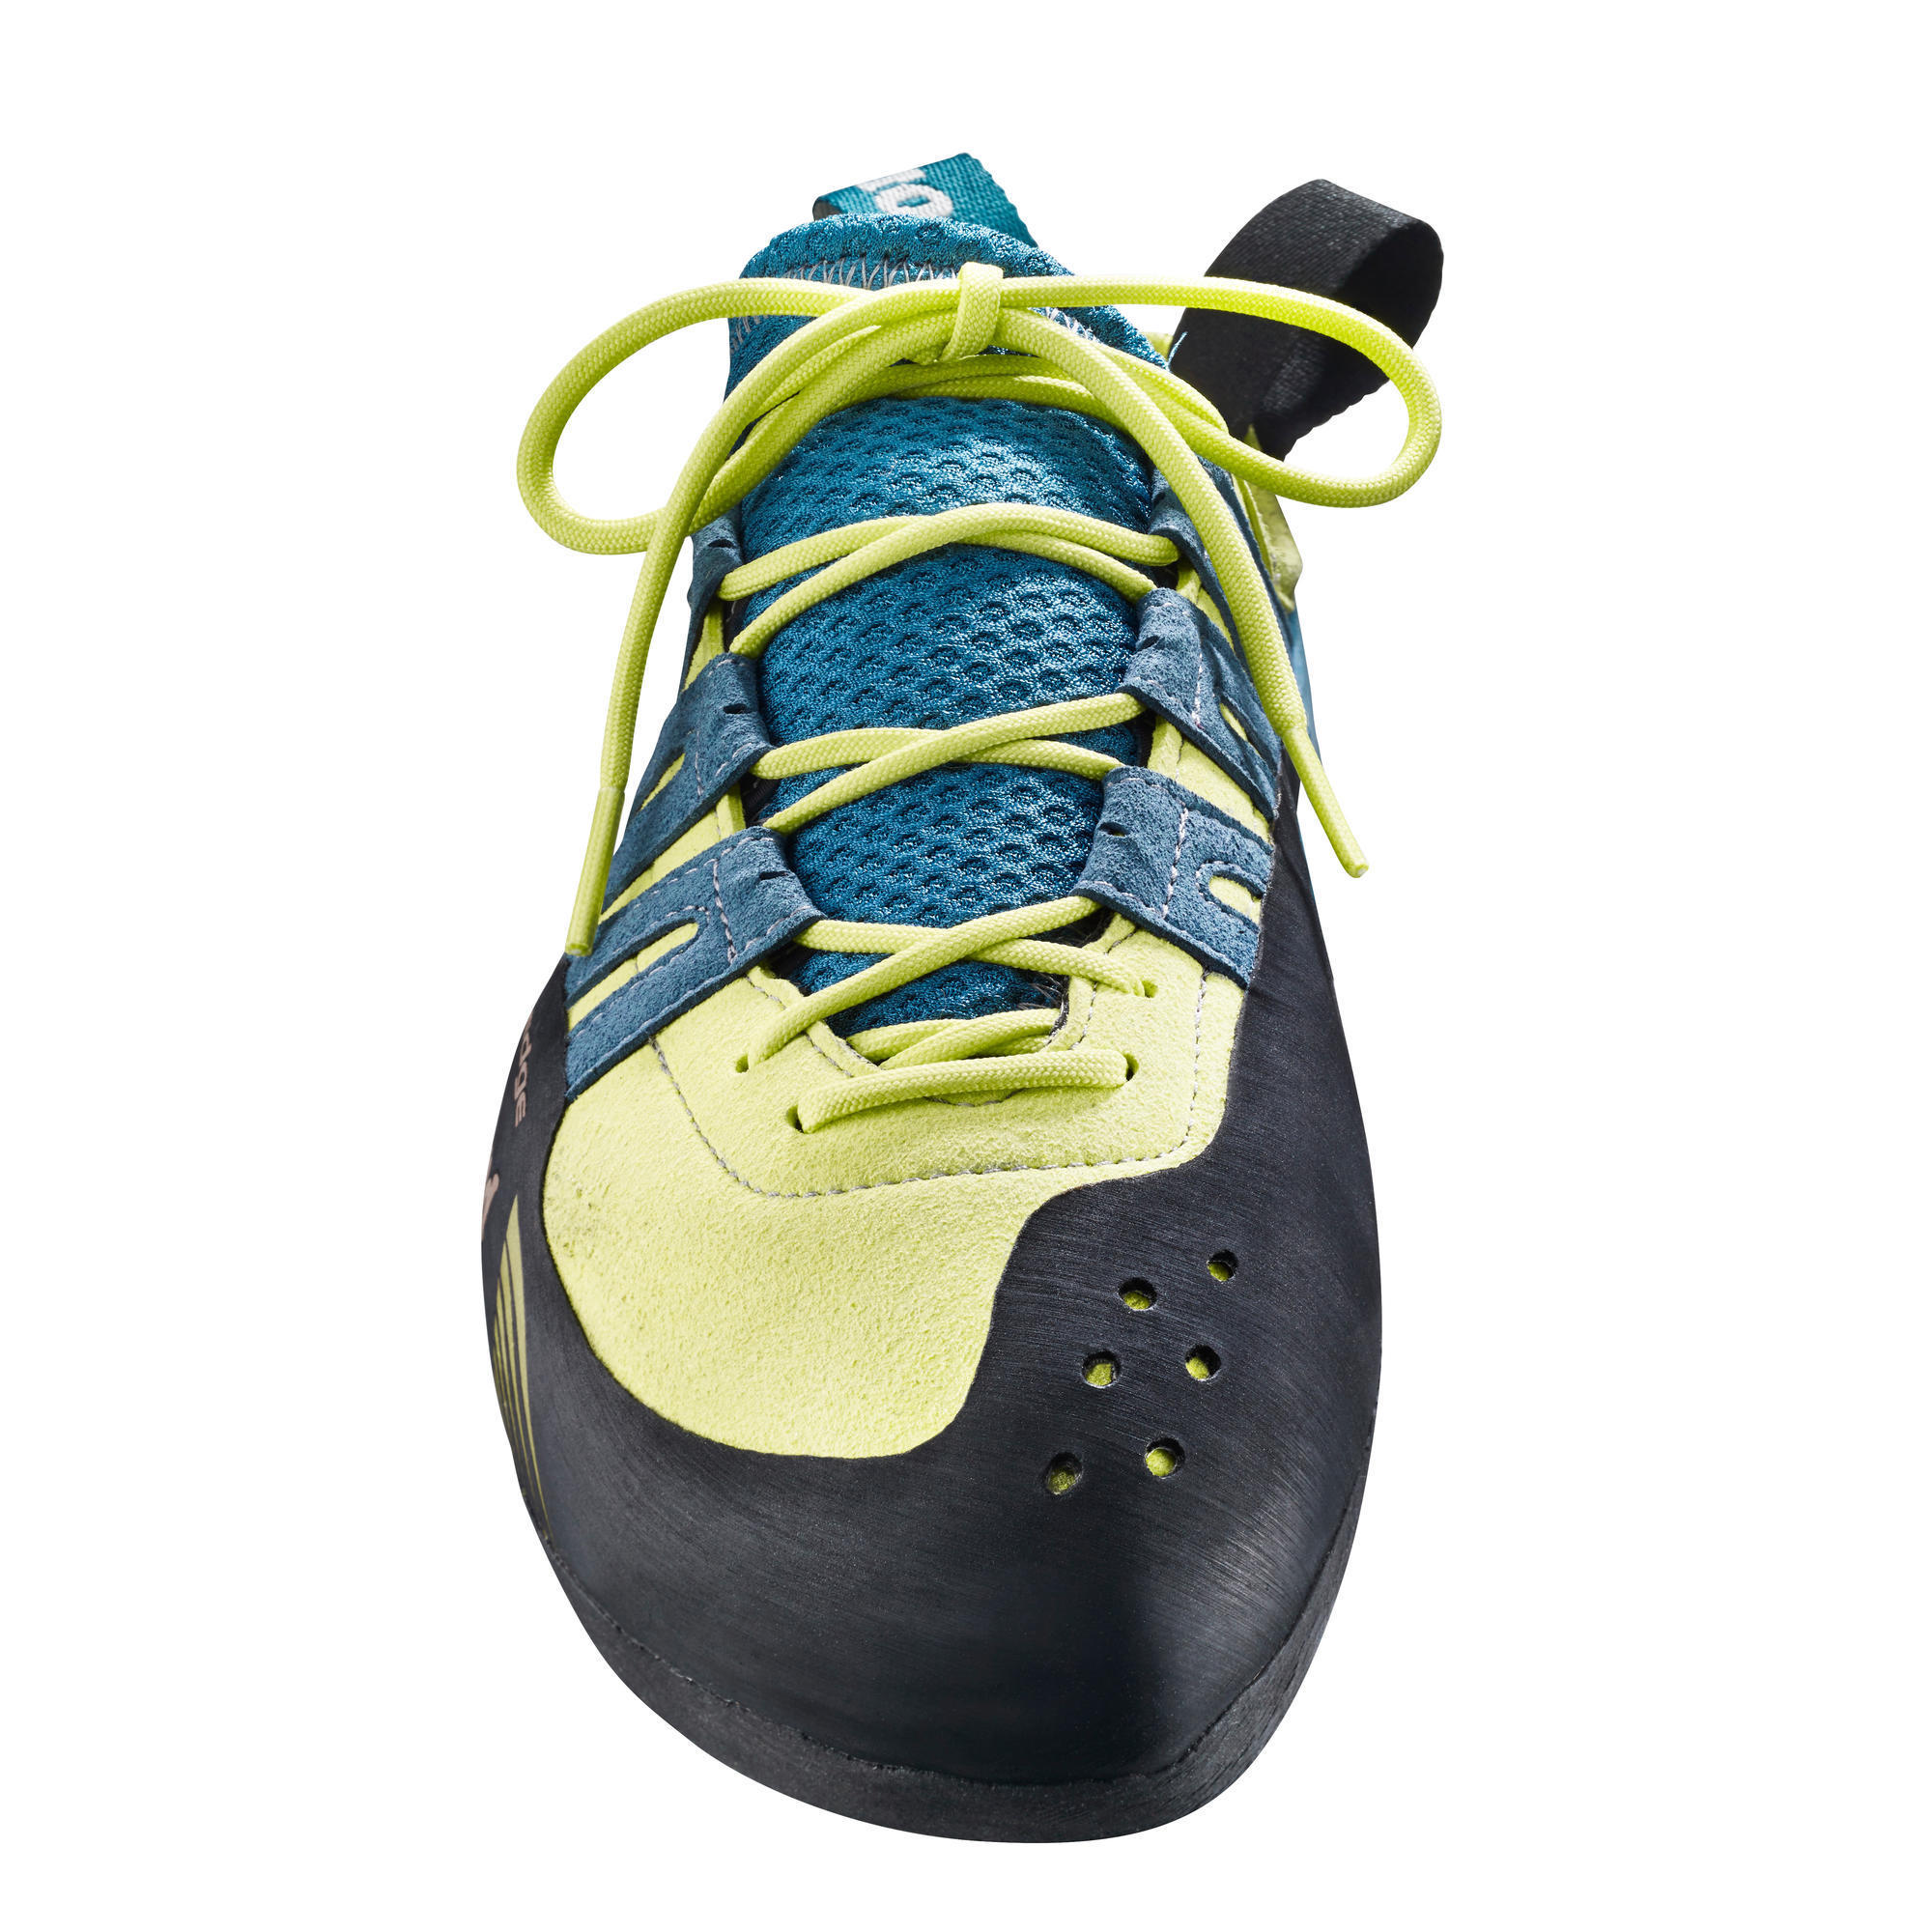 up climbing shoes